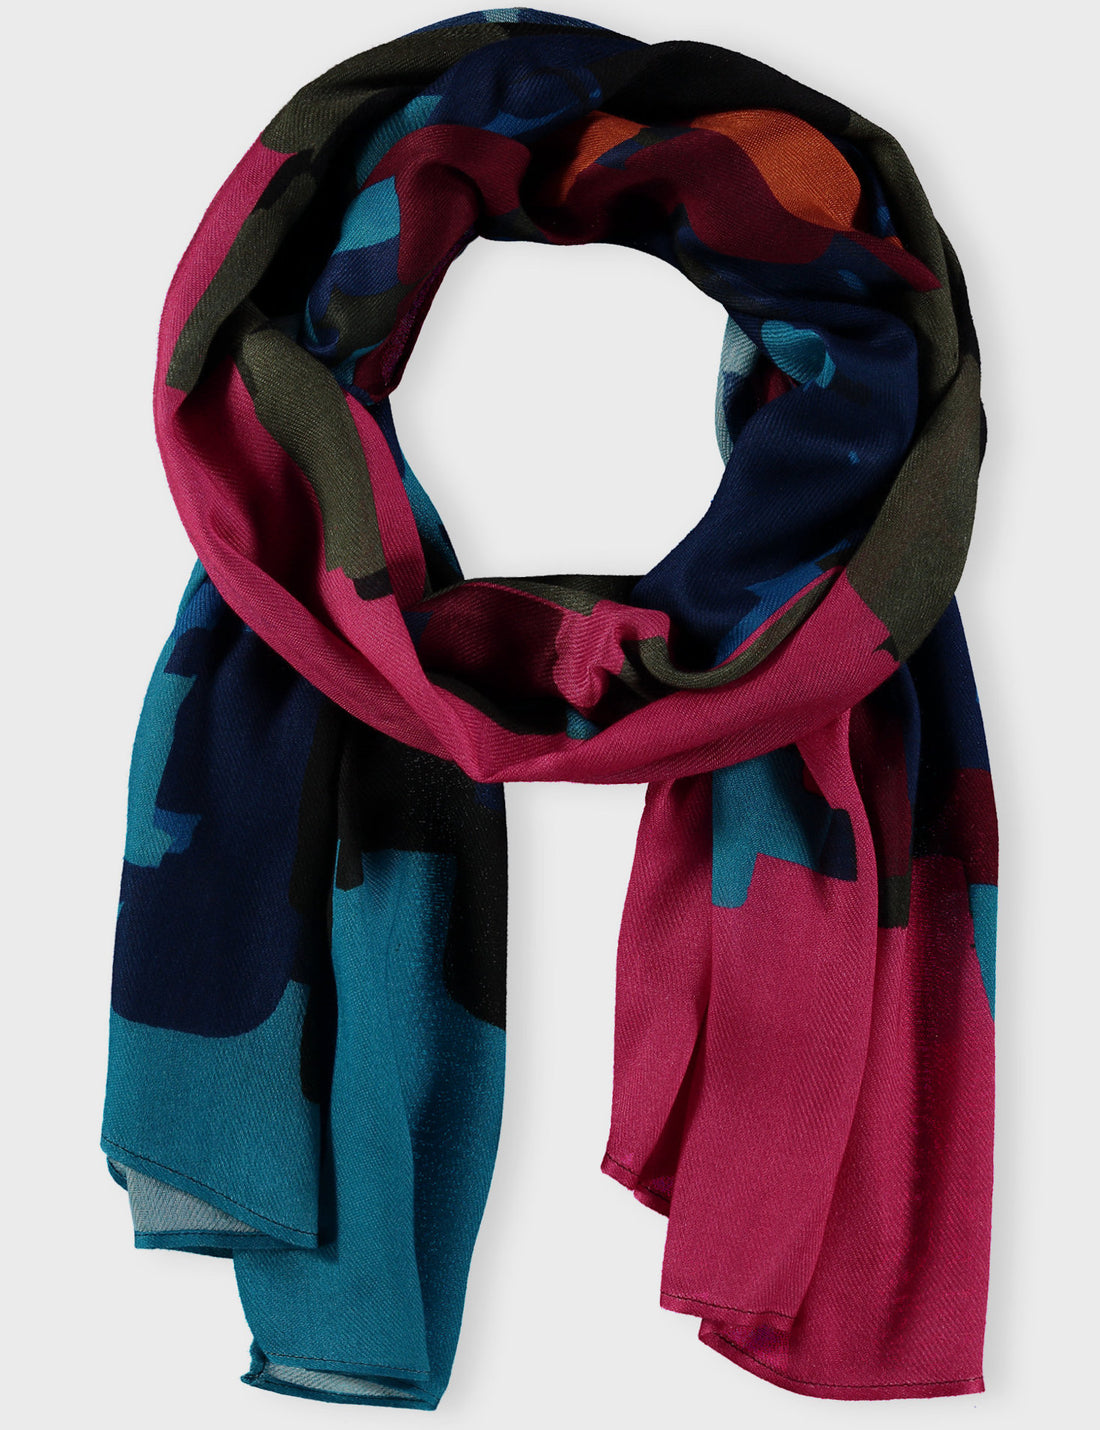 Soft Scarf With A Bright Print_400002-23102_8822_02